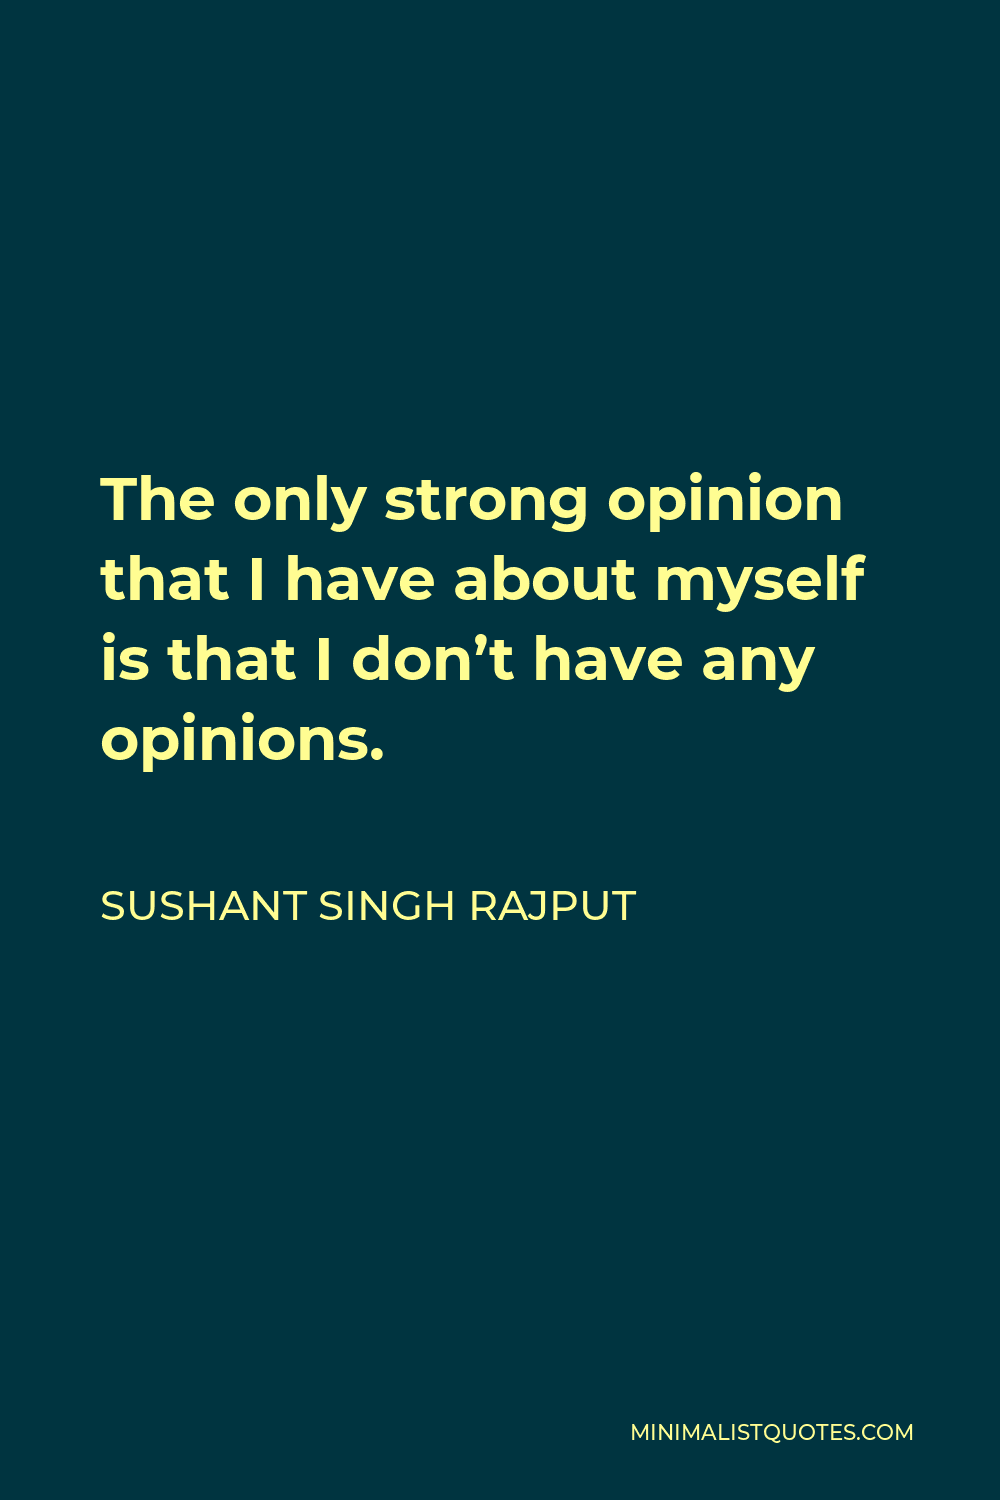 Sushant Singh Rajput Quote - The only strong opinion that I have about myself is that I don’t have any opinions.